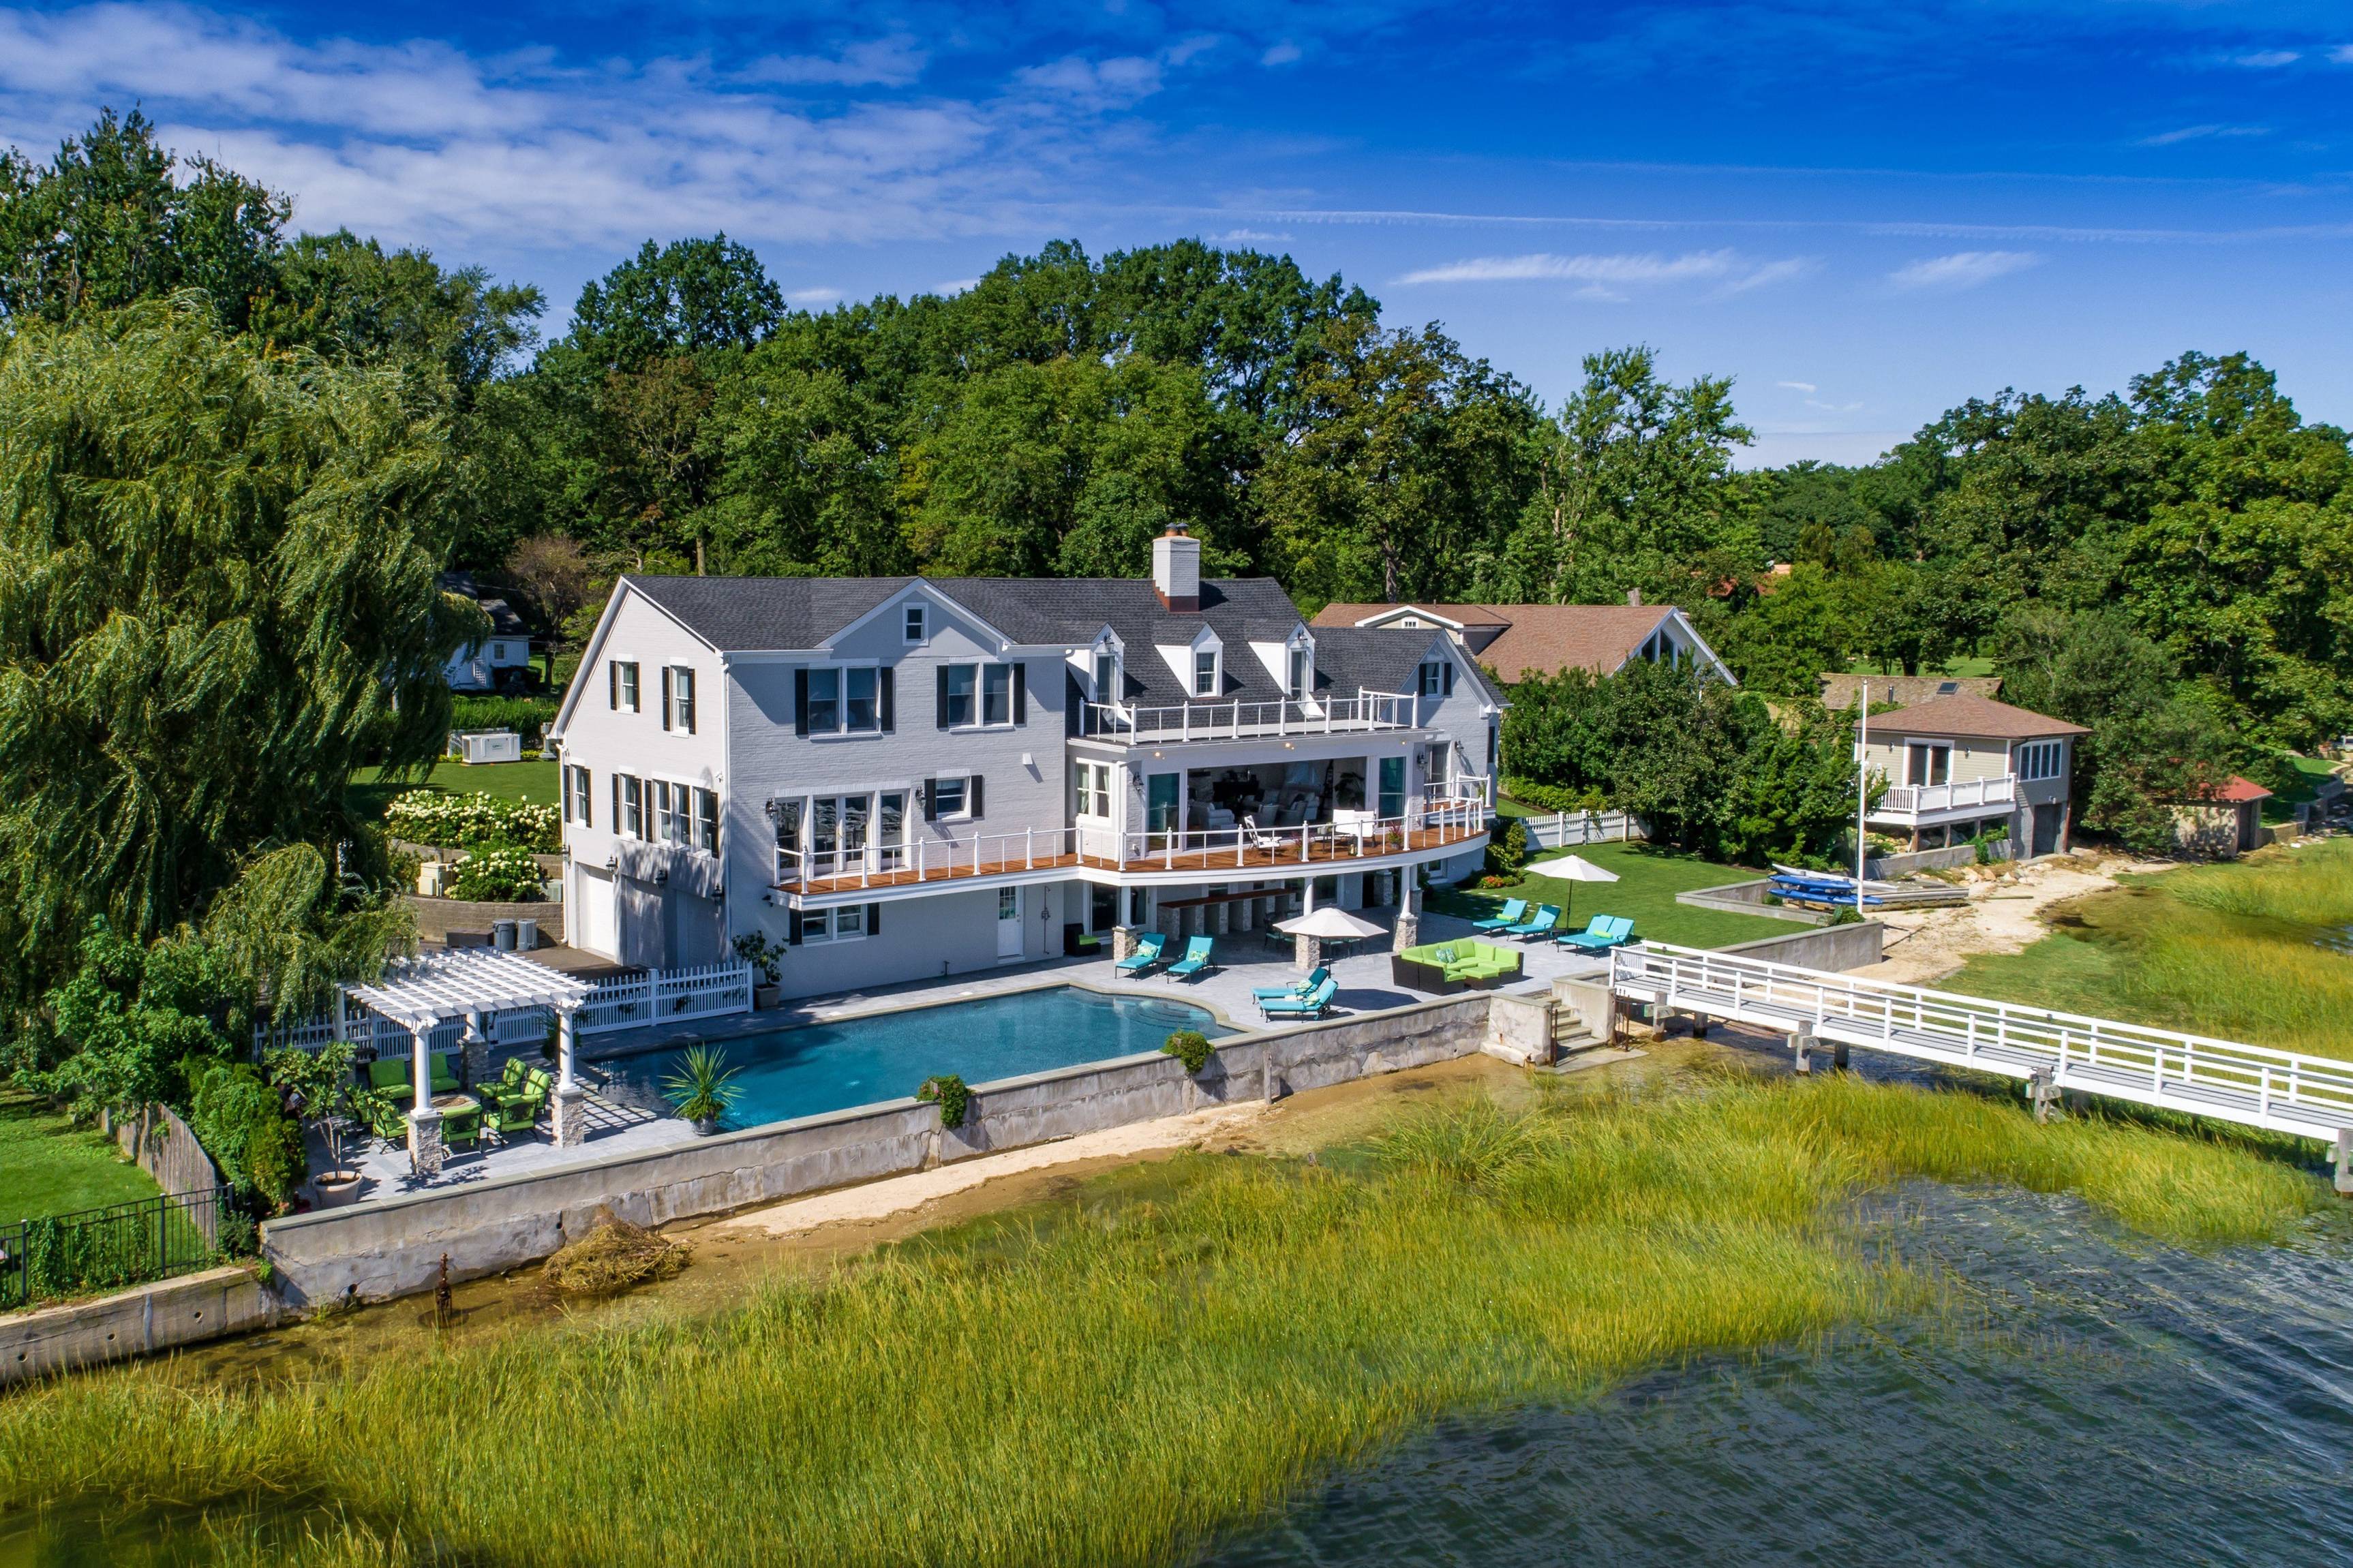 Gated Waterfront Estate  With Over 100 Ft Dock Overlooking Oyster Bay Harbor!